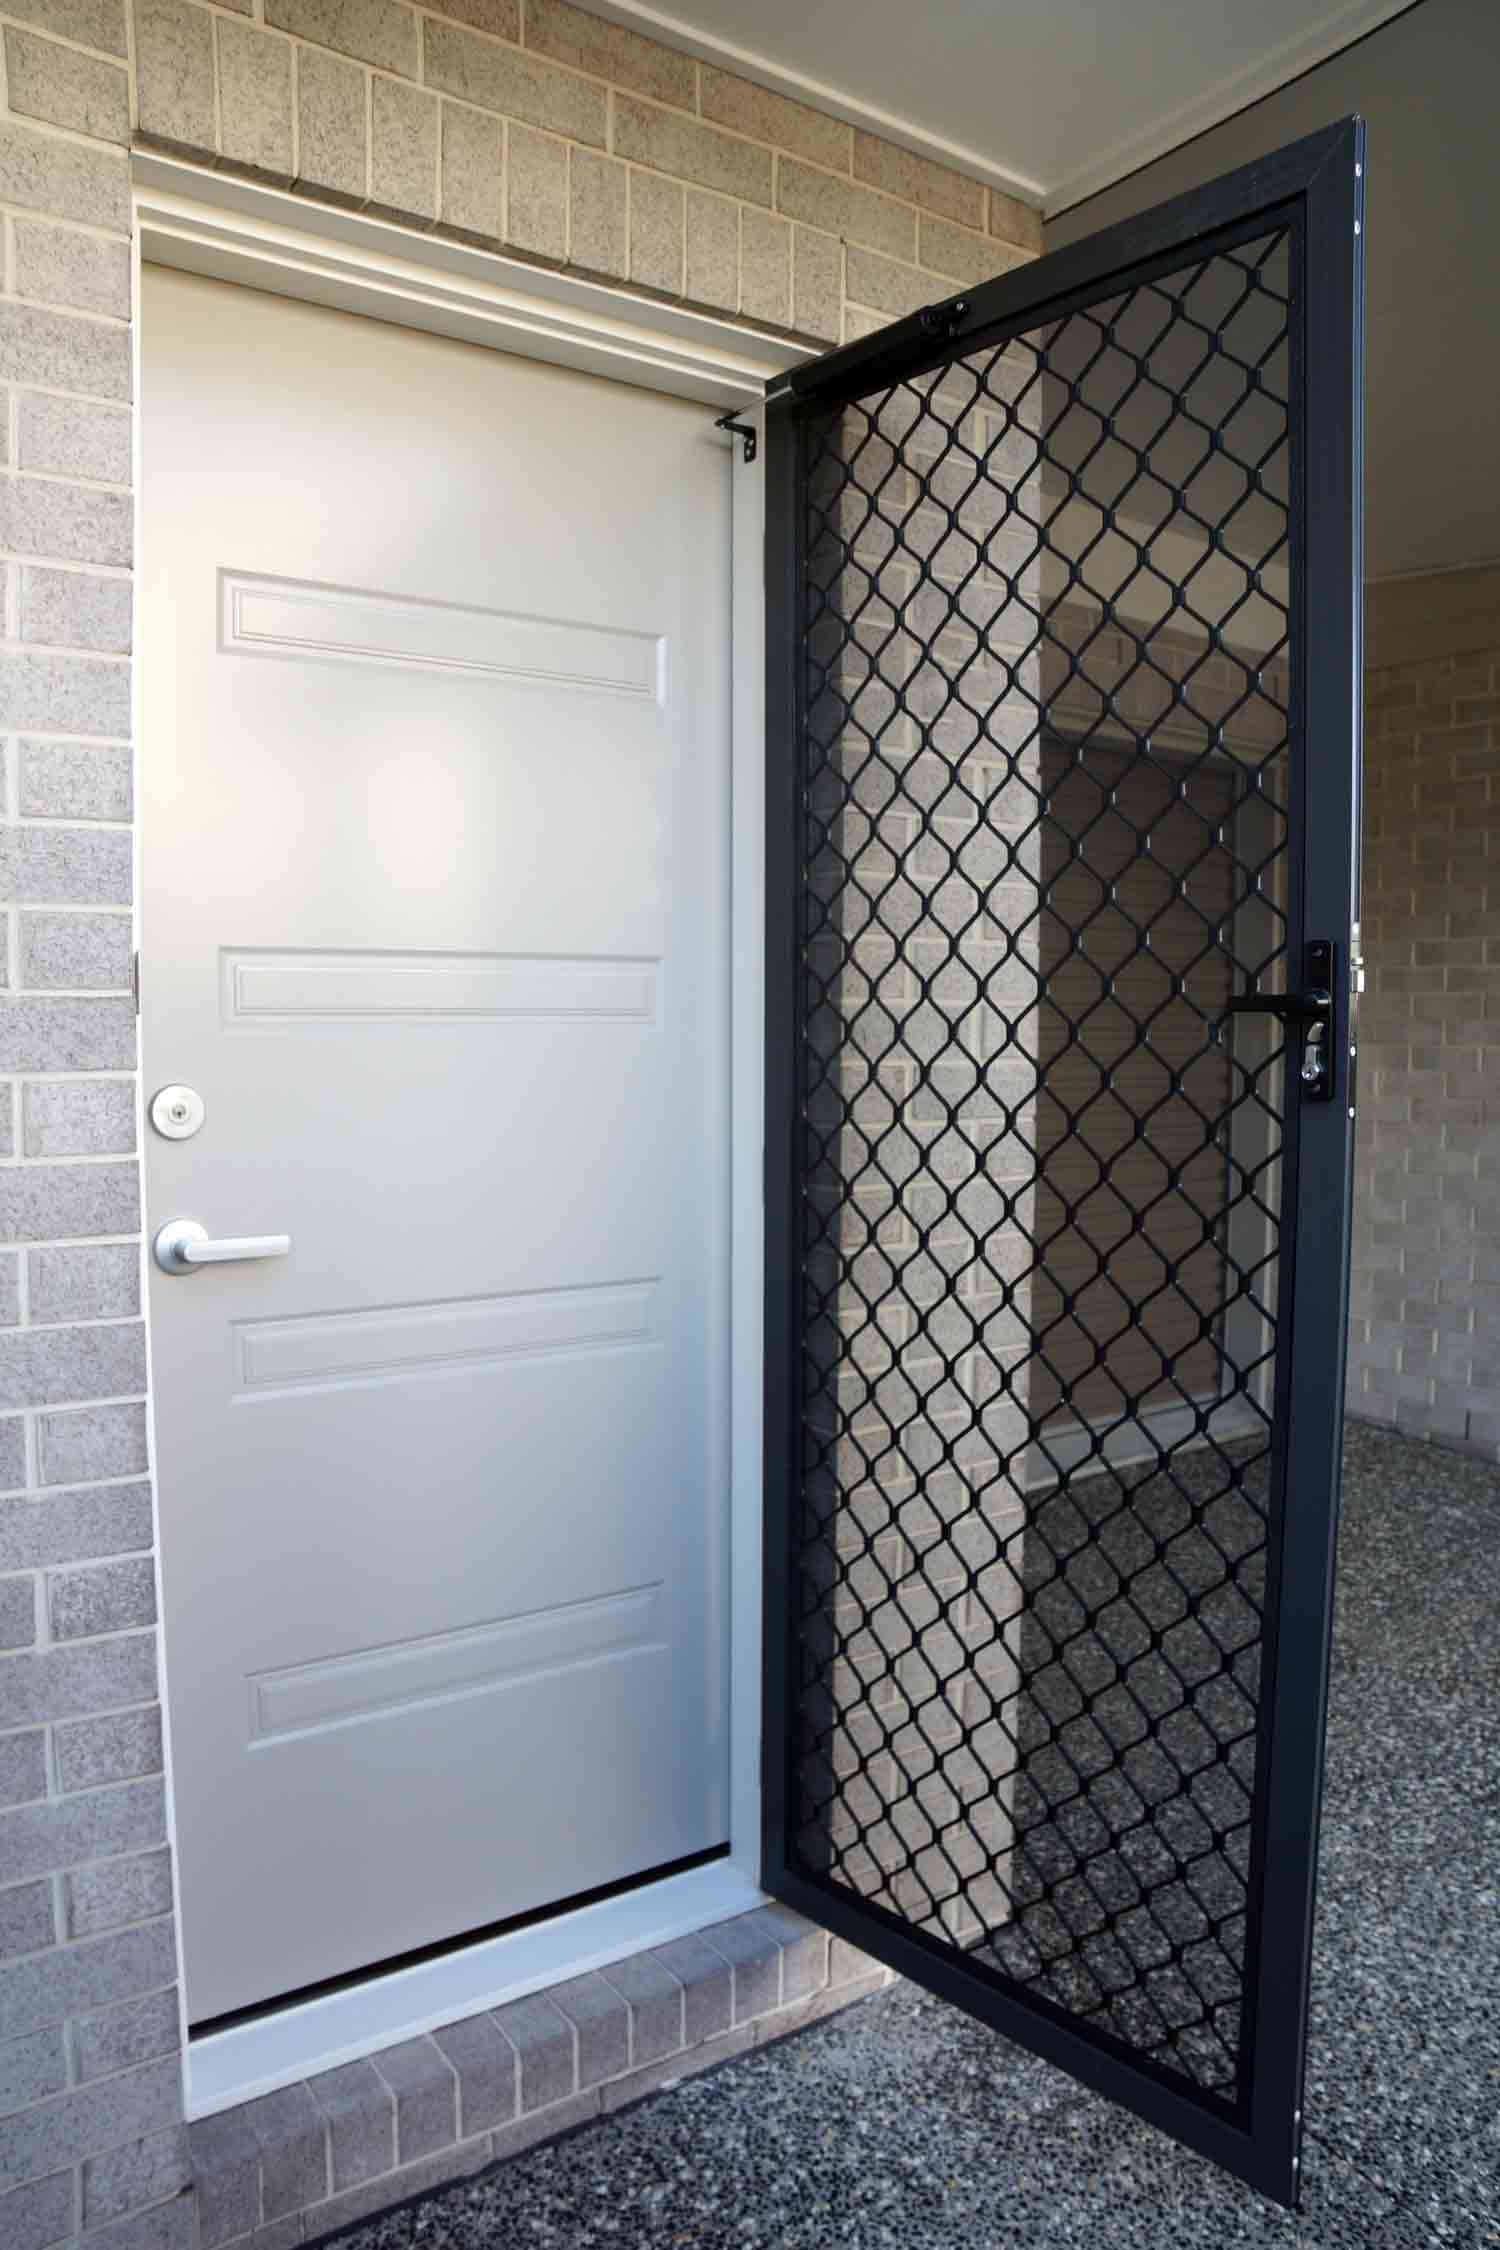 Hinged security doors and security solutions